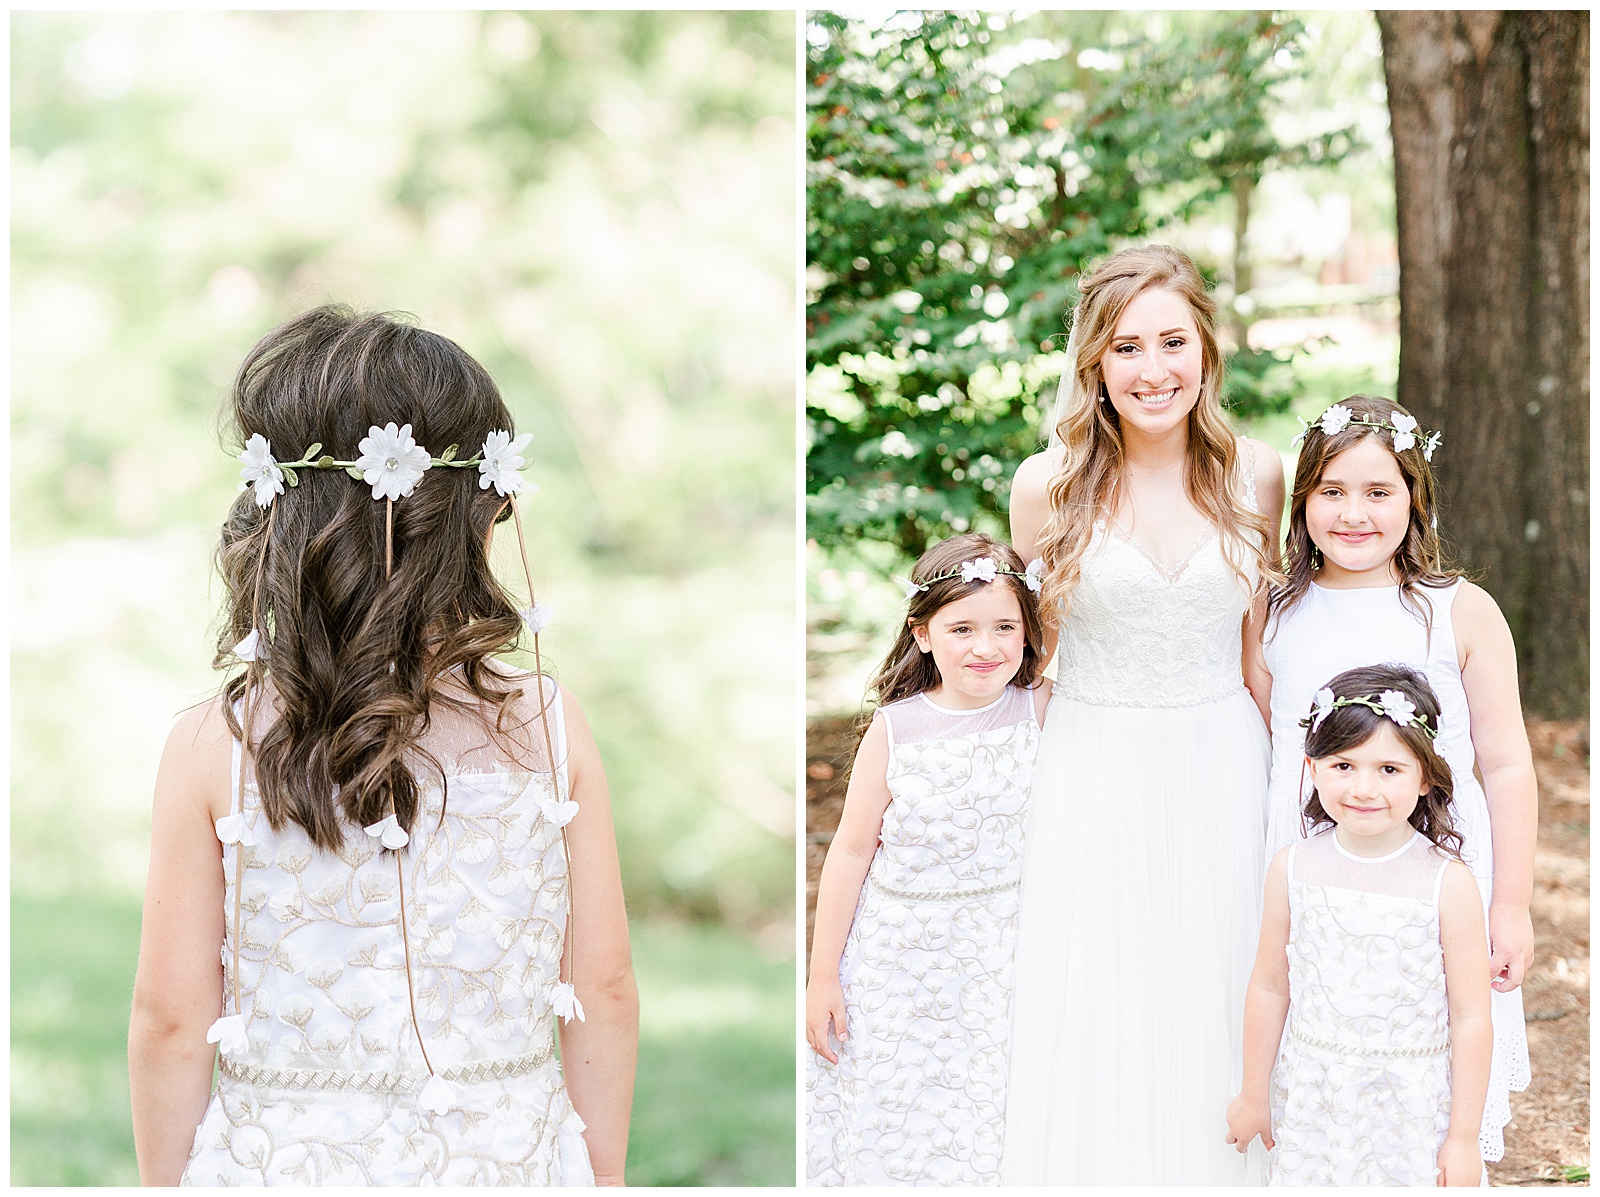 Adorable brown-haired flower girl with daisy crown and cute lace dress from Elegant Modern Red and Navy Blue Themed Wedding in Charlotte, NC | check out the full wedding at KevynDixonPhoto.com